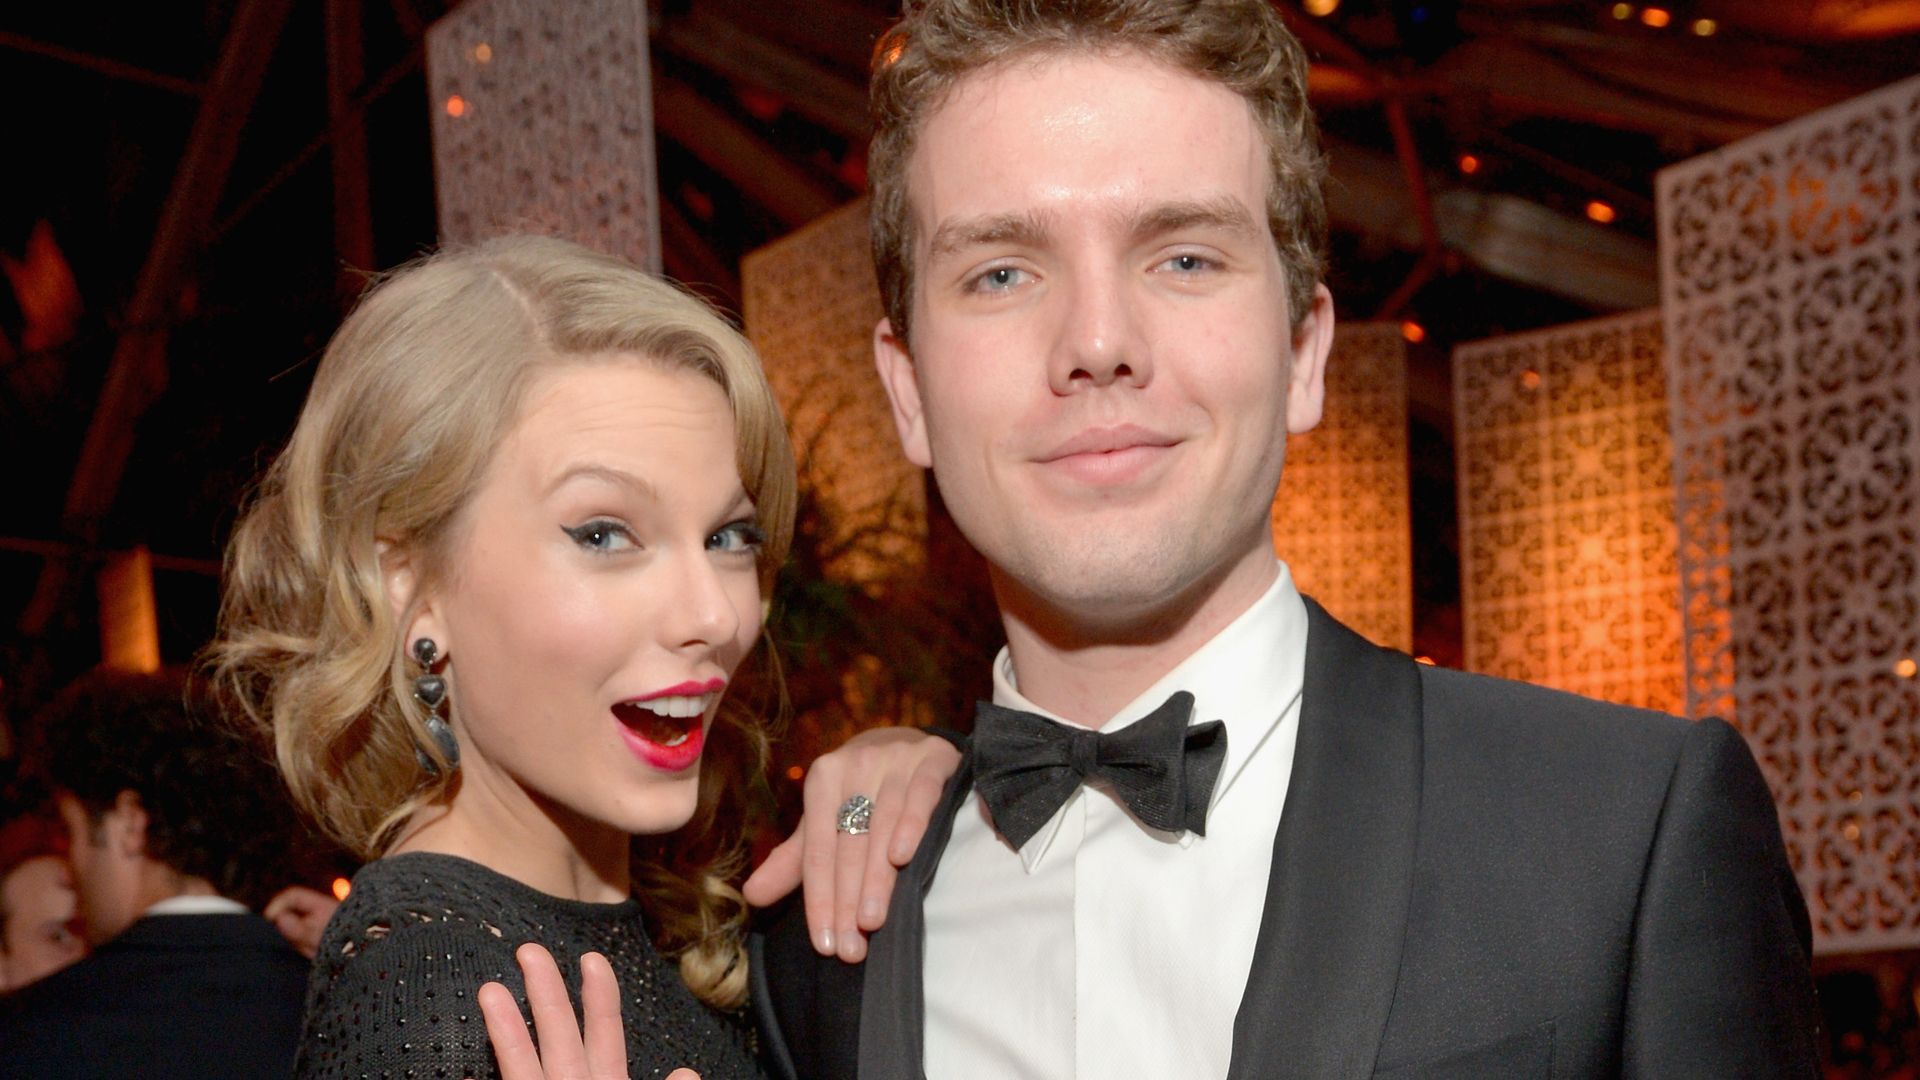 Taylor Swift posing and waving with her brother Austin Swift at a fancy event